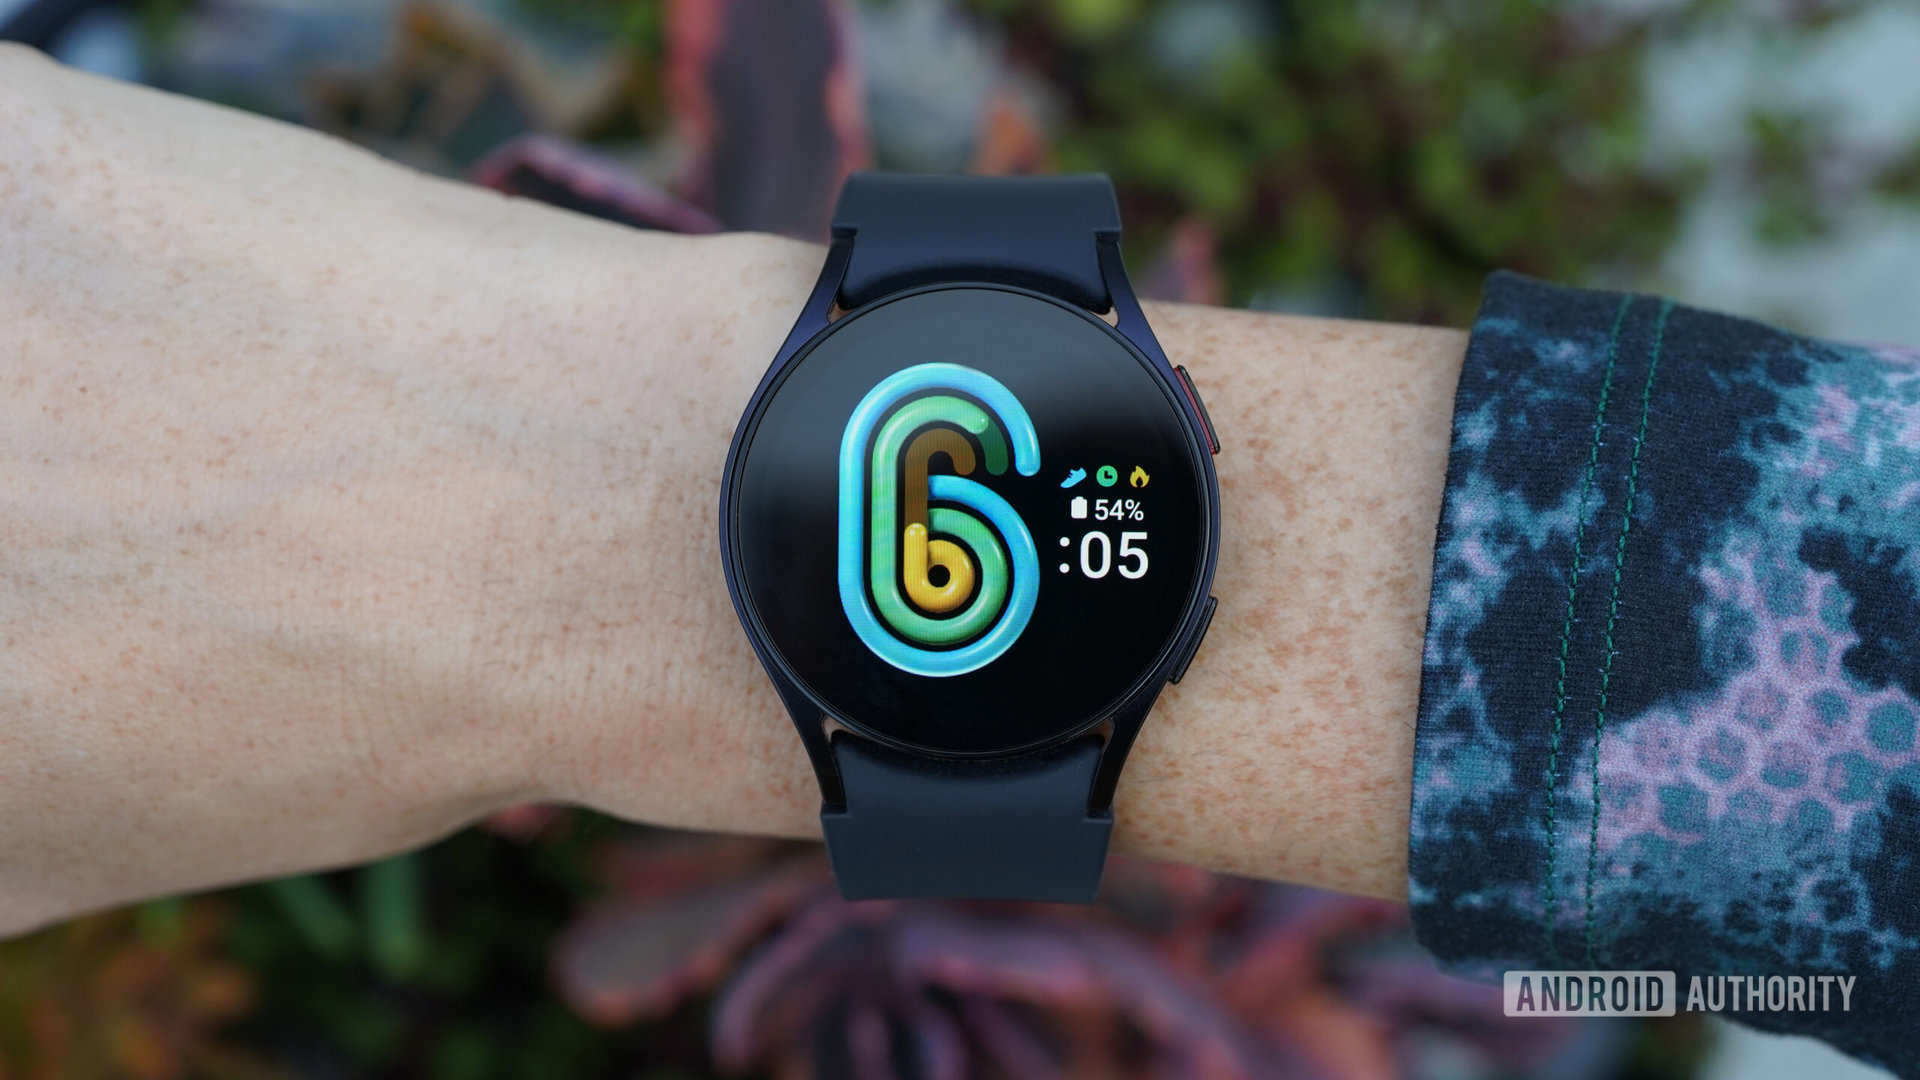 Samsung is giving all Galaxy phone users a chance to win a free Galaxy Watch 6